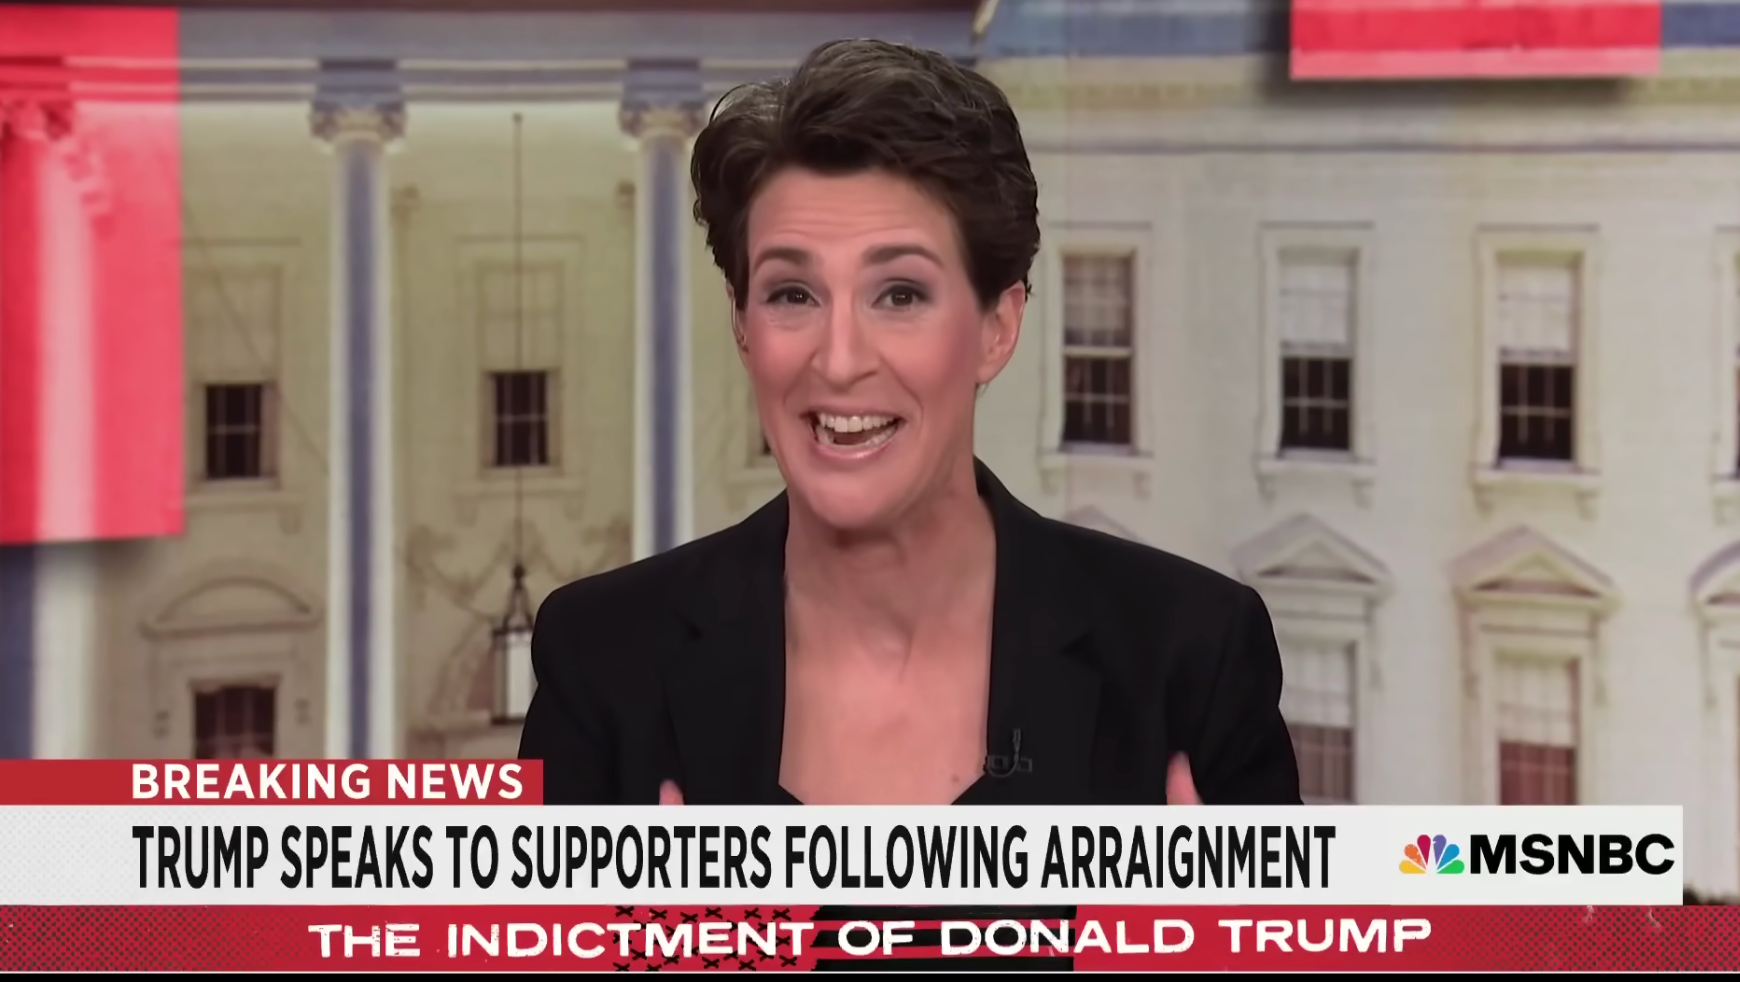 Rachel Maddow Takes a Stand for Truth: The Controversy Surrounding Her Decision to Not Air Trump's Speech